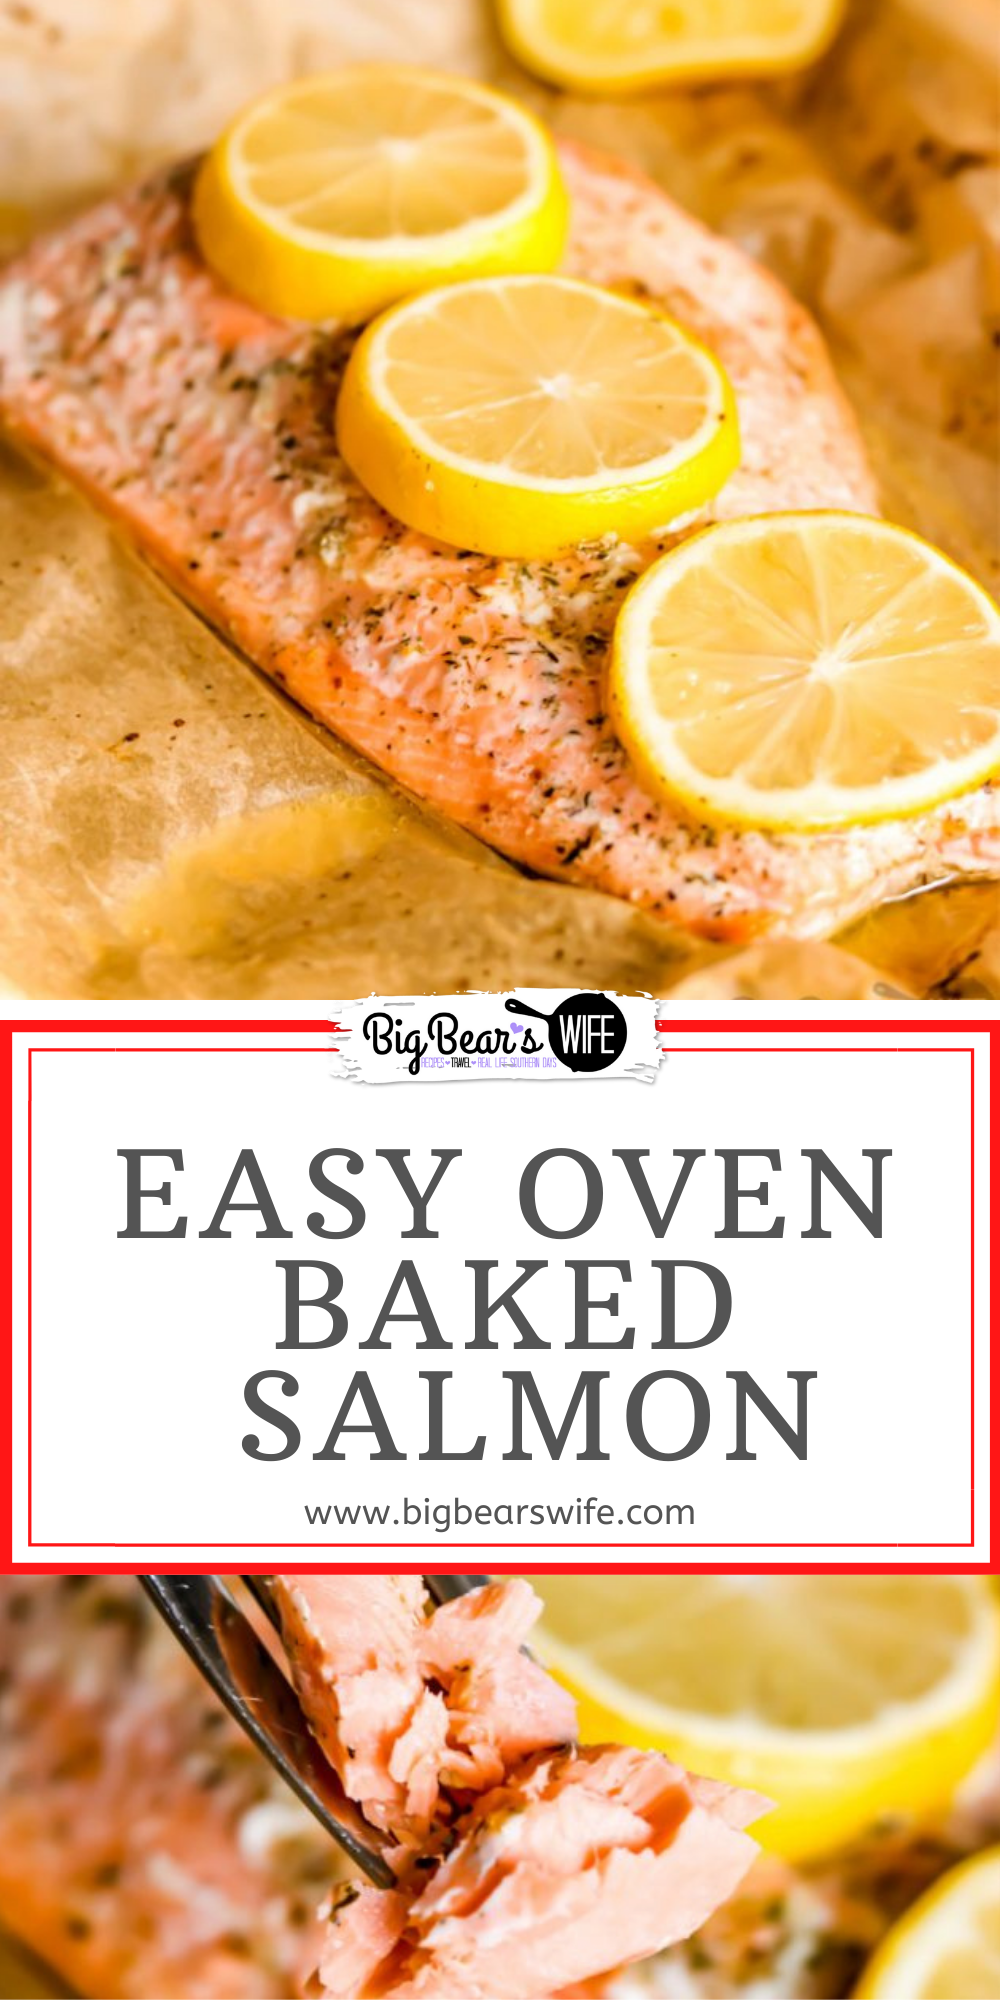 Dinner in under 30 minutes! This recipe for Easy Mediterranean Seasoned Parchment Paper Salmon is quick to make and easy to adapt for all kinds of different seasonings.  via @bigbearswife